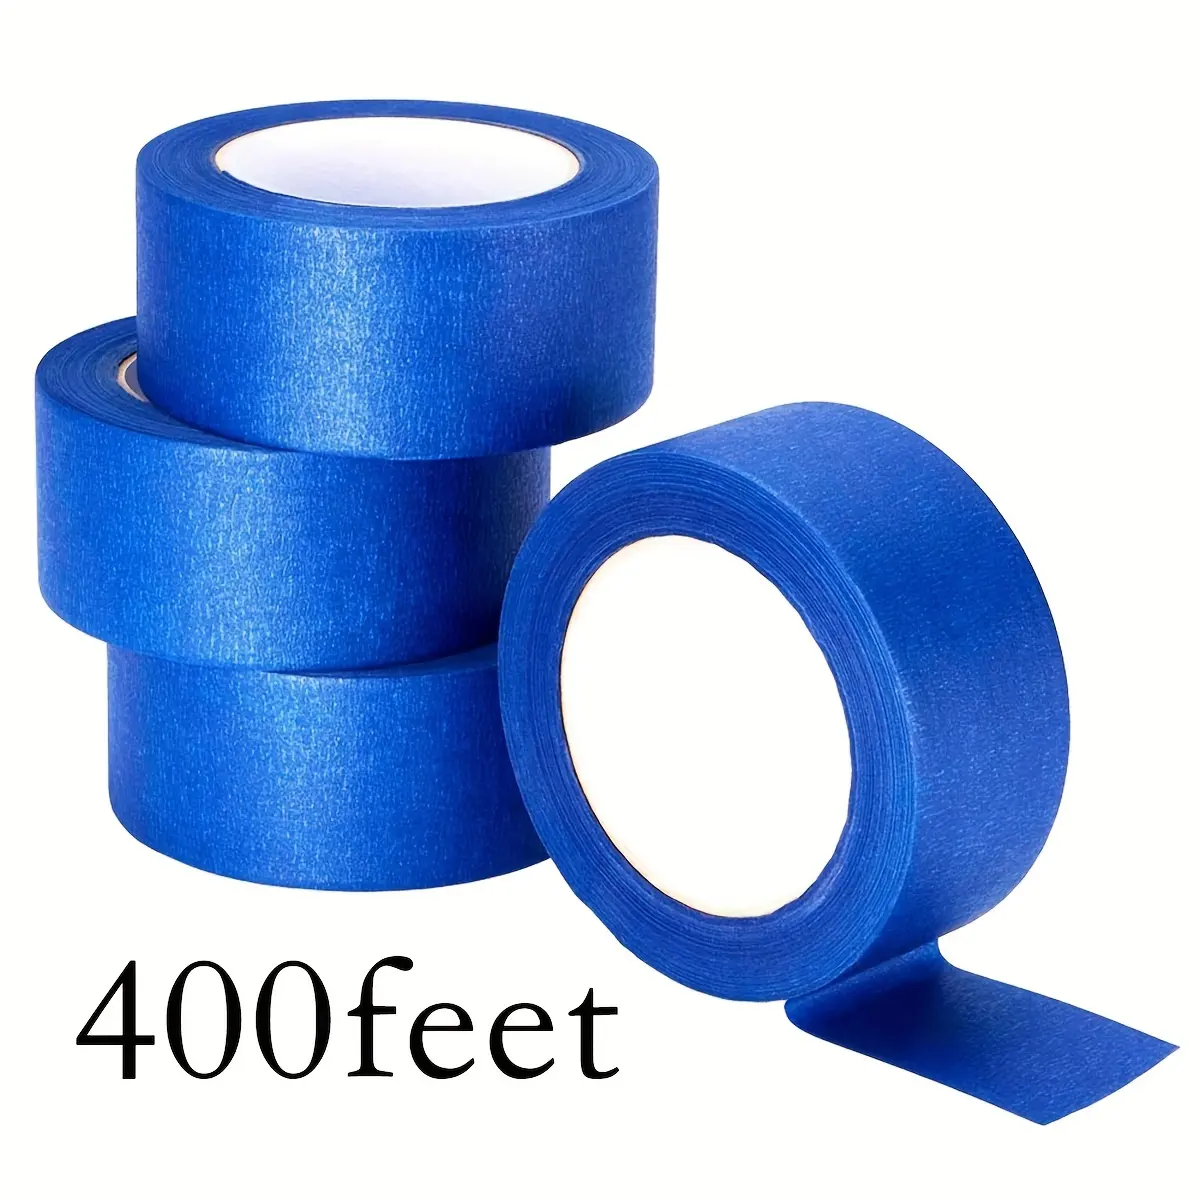 High Quality 100 Teet * 1in Blue Painters Tape Widely Applicable Blue Masking Painting Tape For Varnishing Decorating Masking